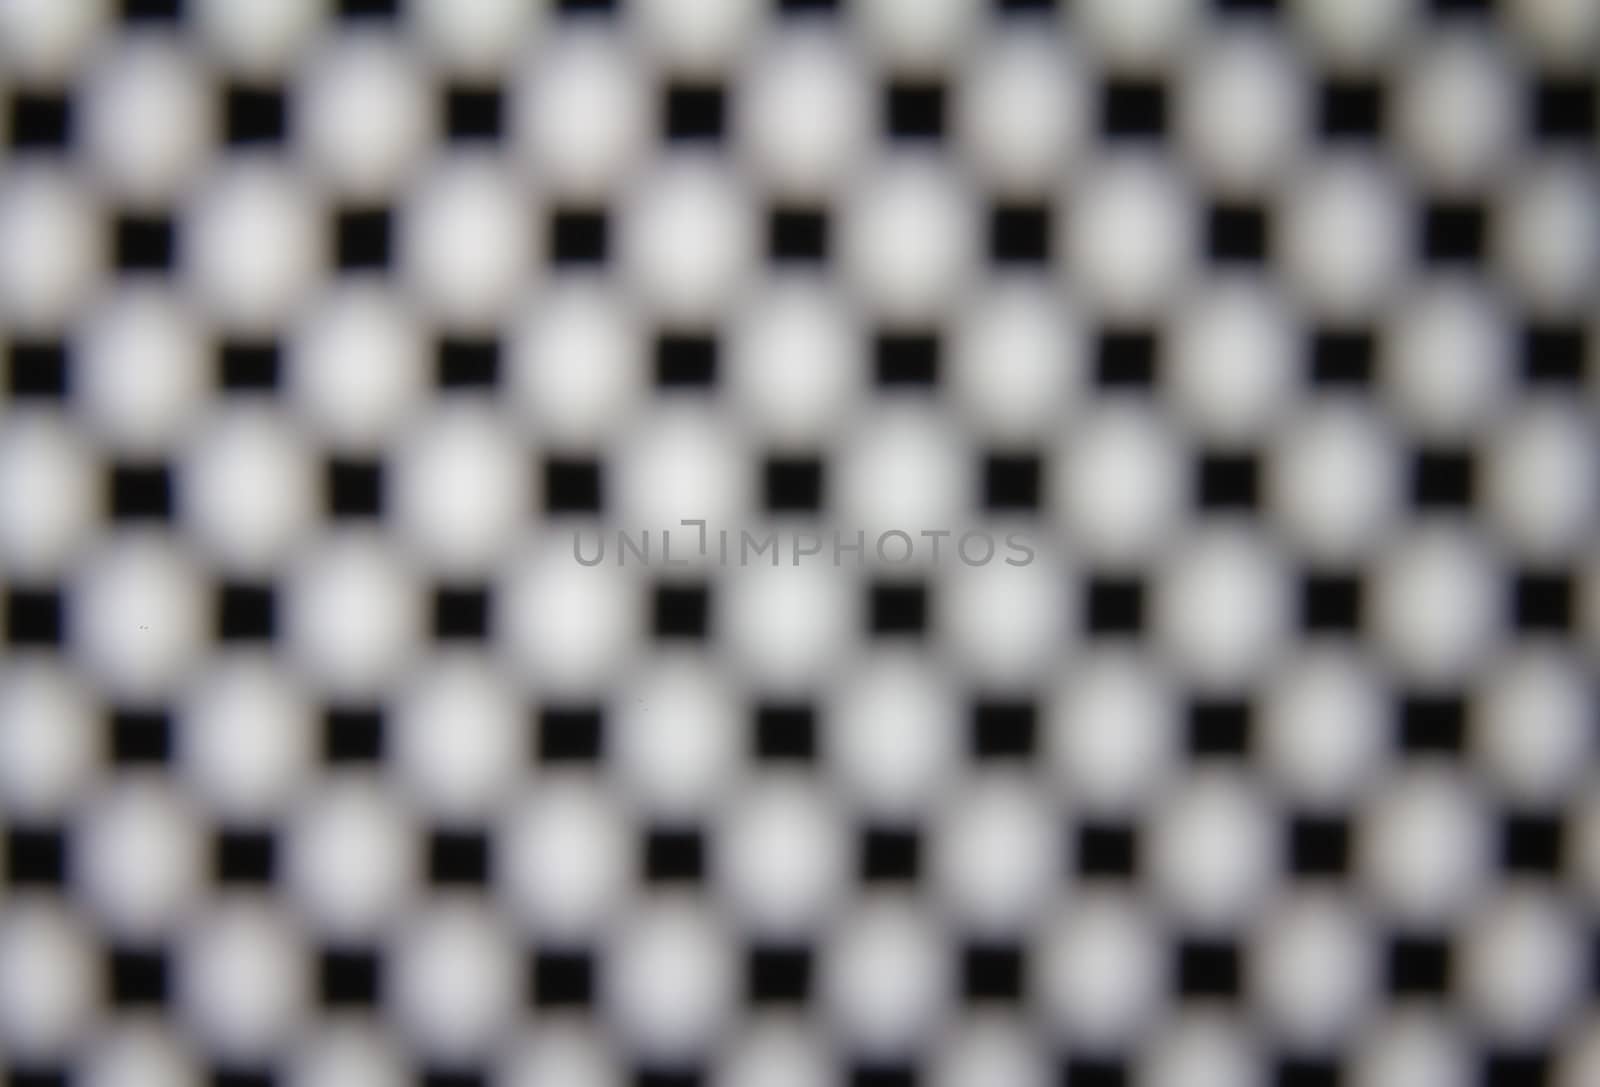 The squre dot grid with Blur focus by peerapixs